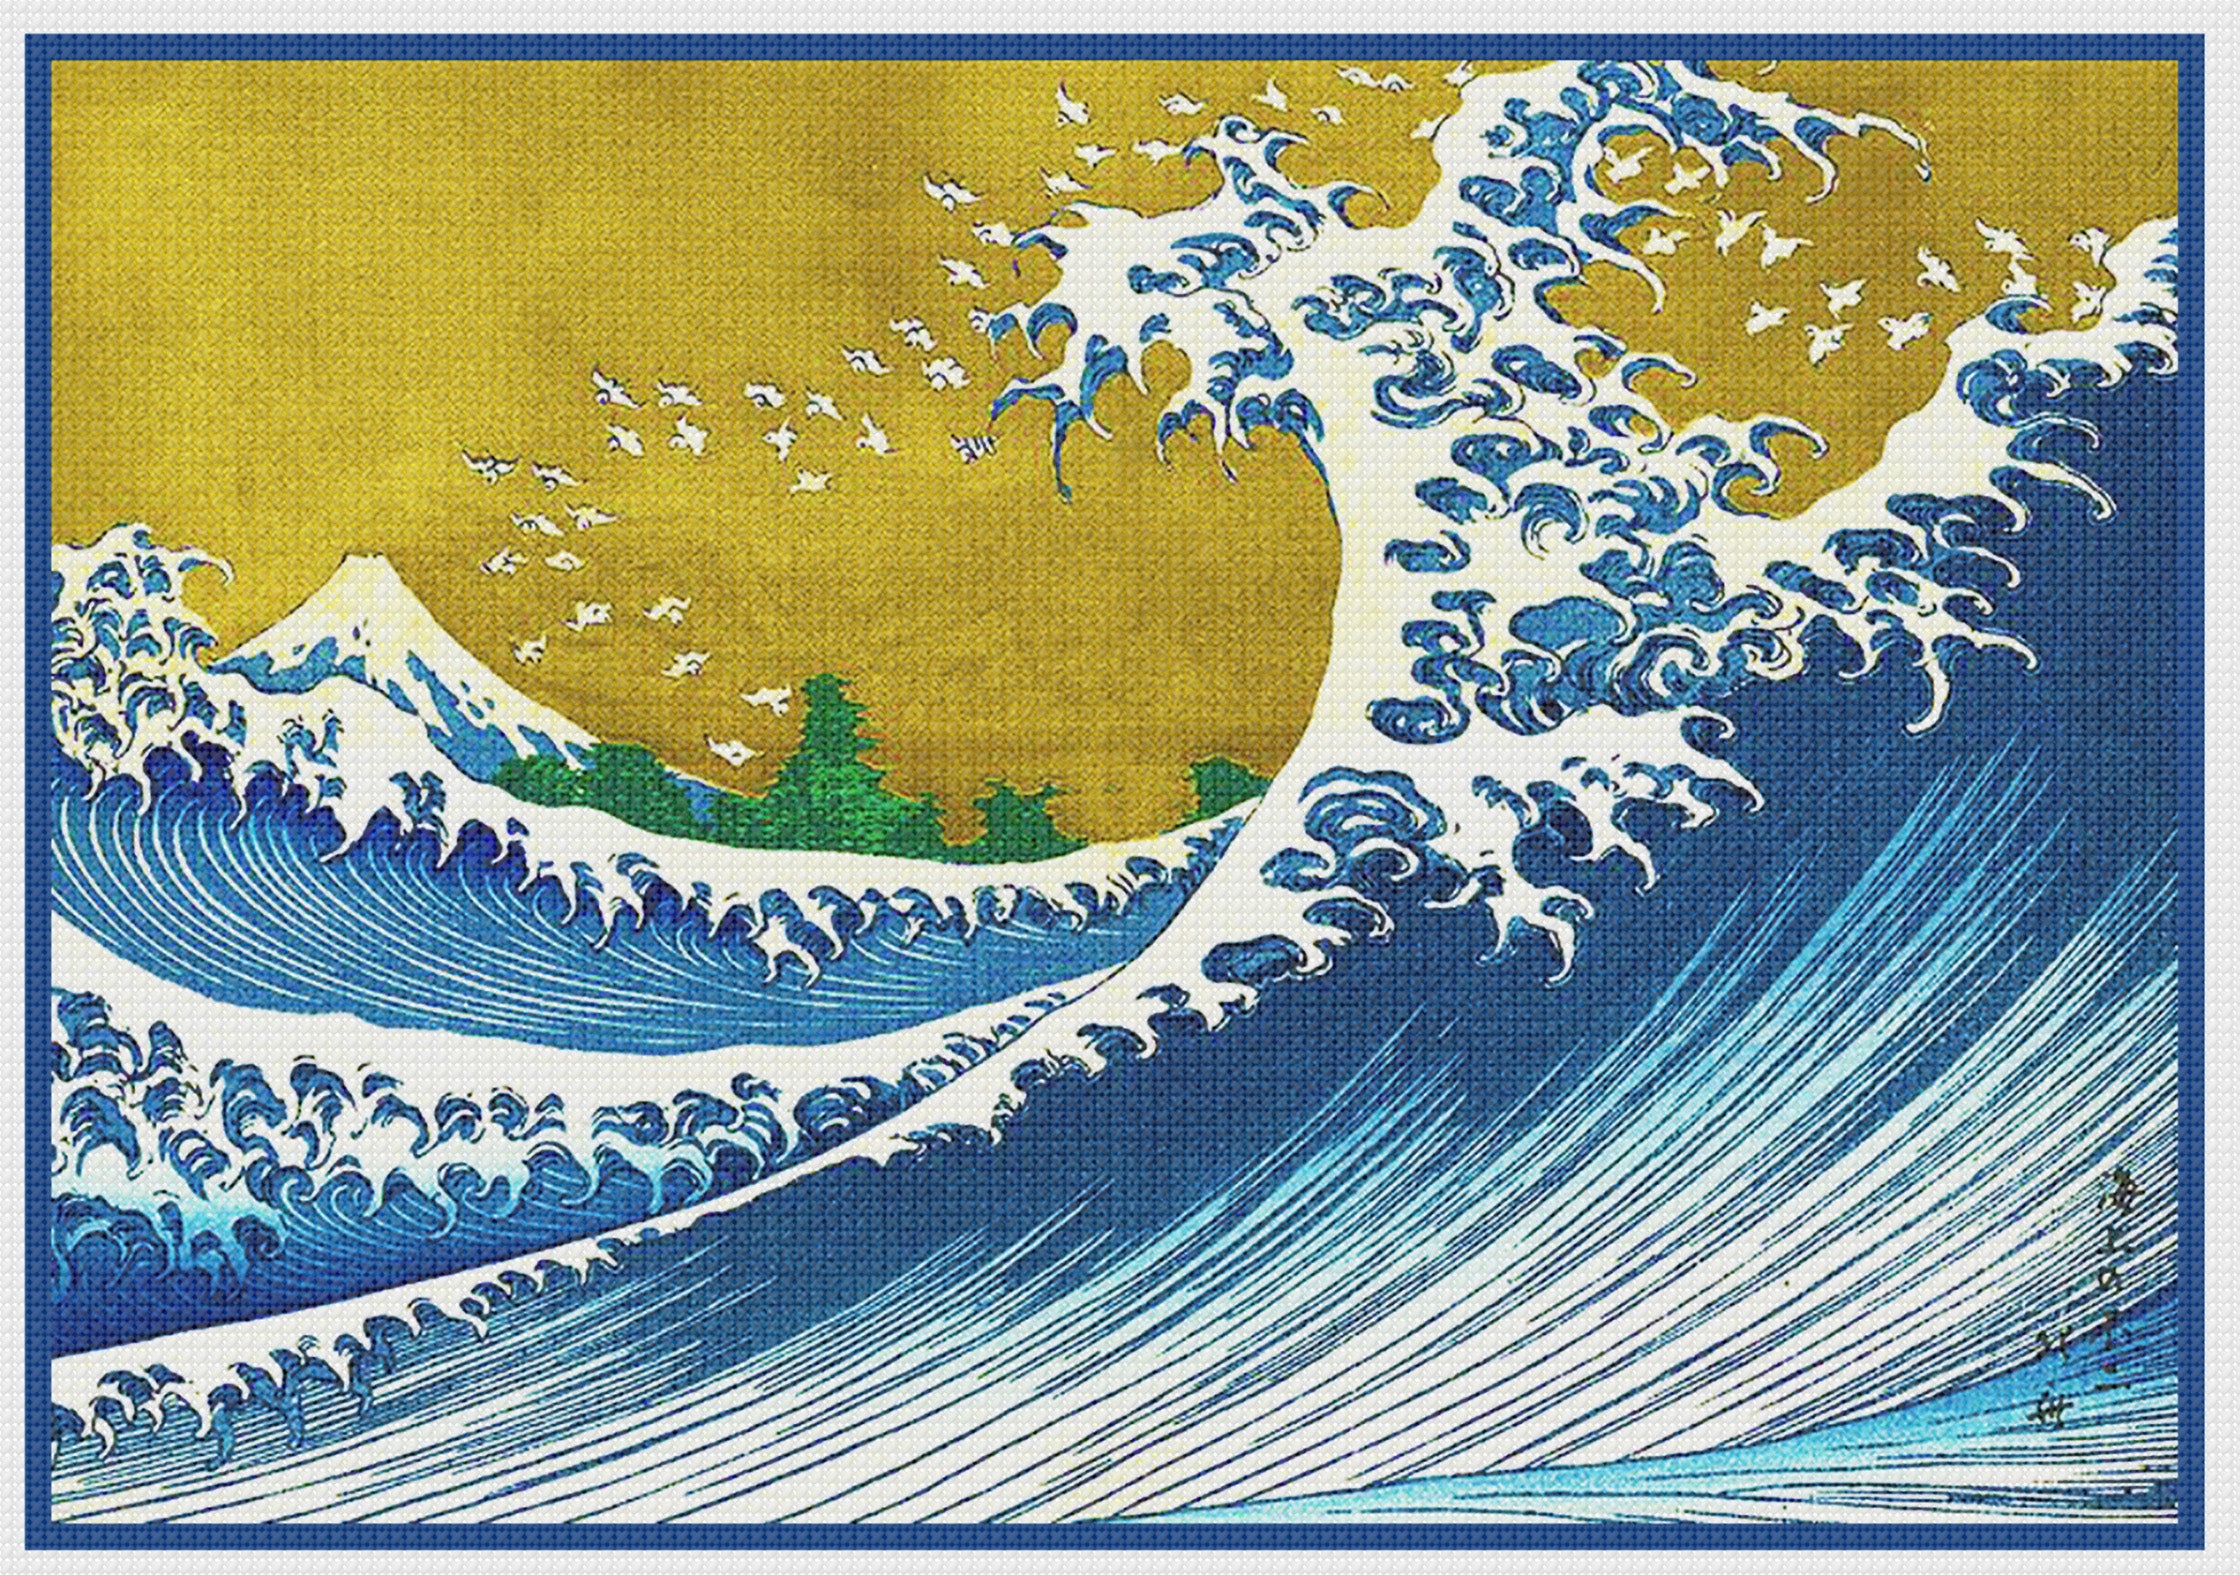 This 115-Year-Old Japanese Wave Design Book Made To Inspire